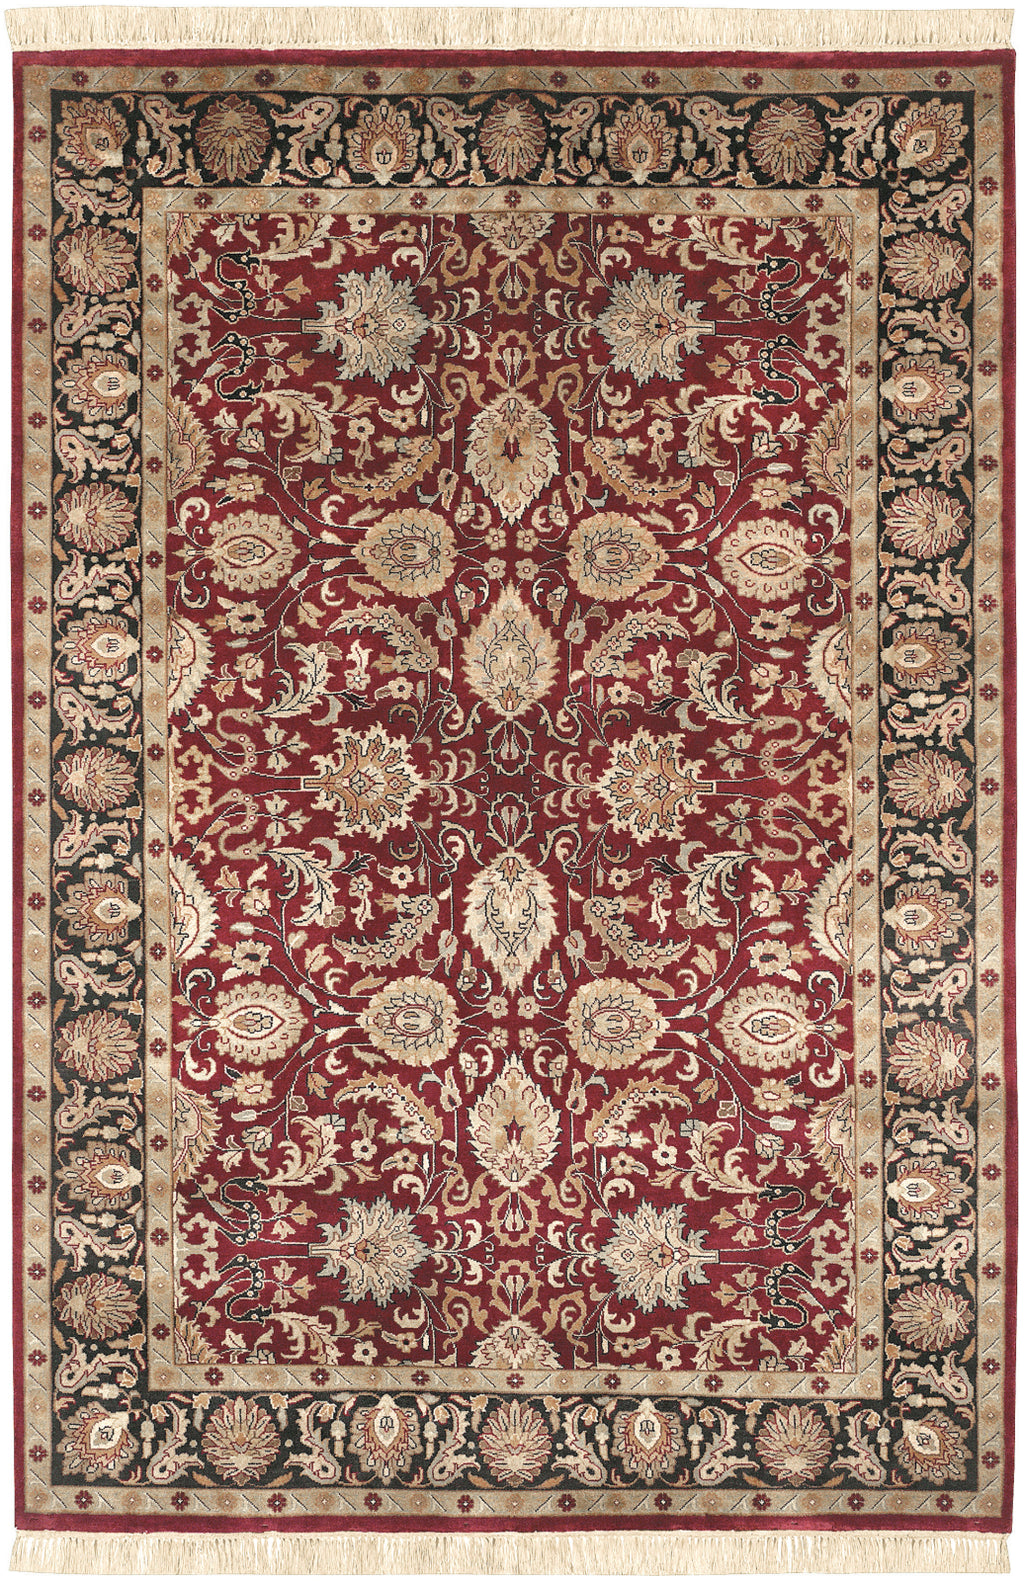 Noble Burgundy X 12 Traditional Floral Oriental Area Rug